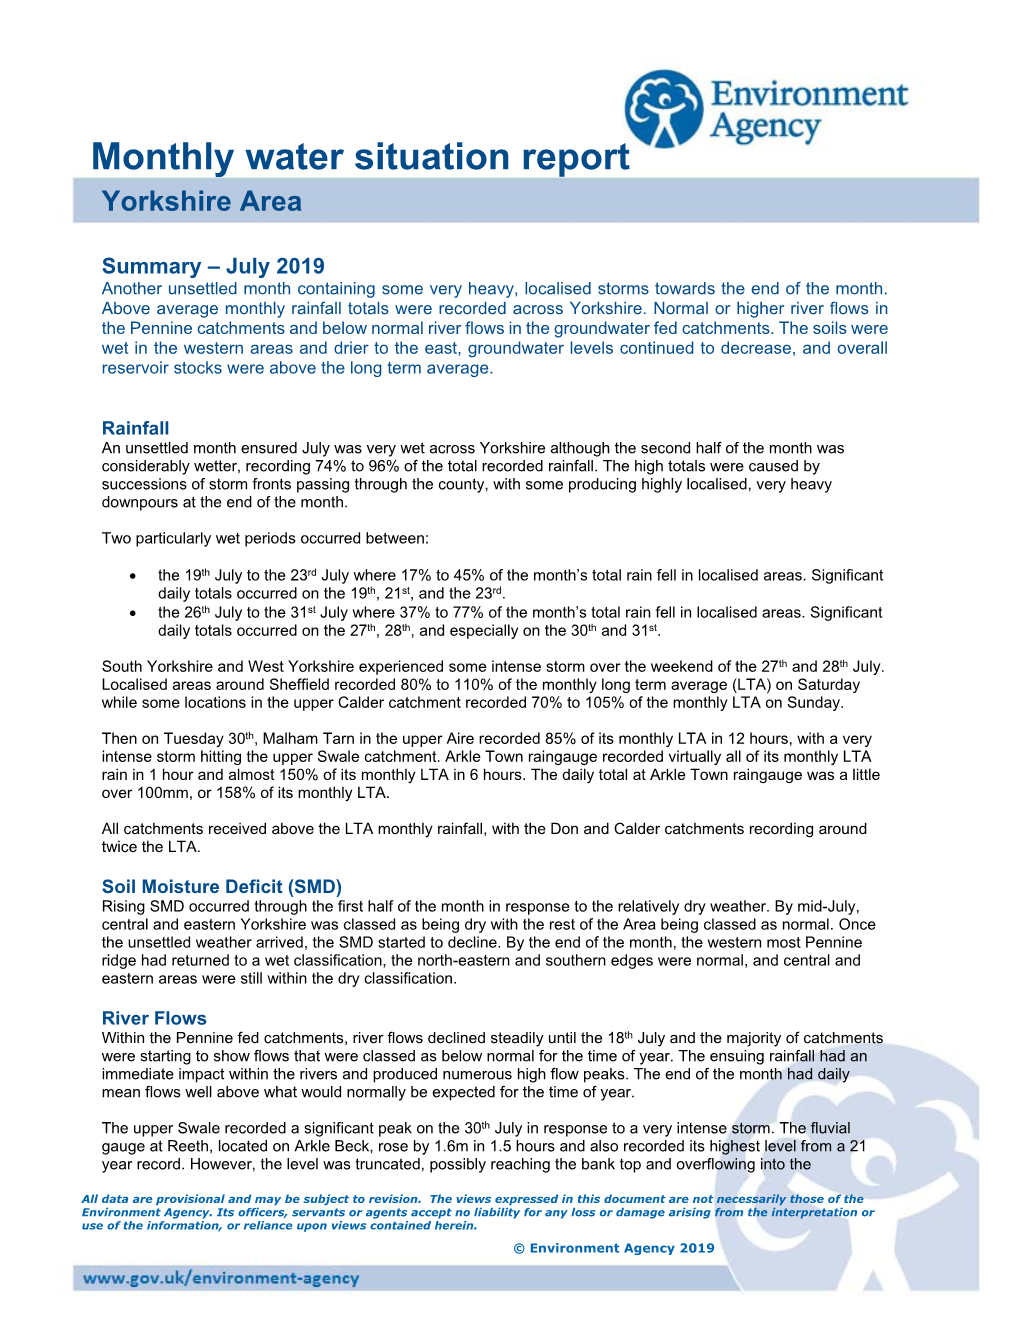 Monthly Water Situation Report Yorkshire Area